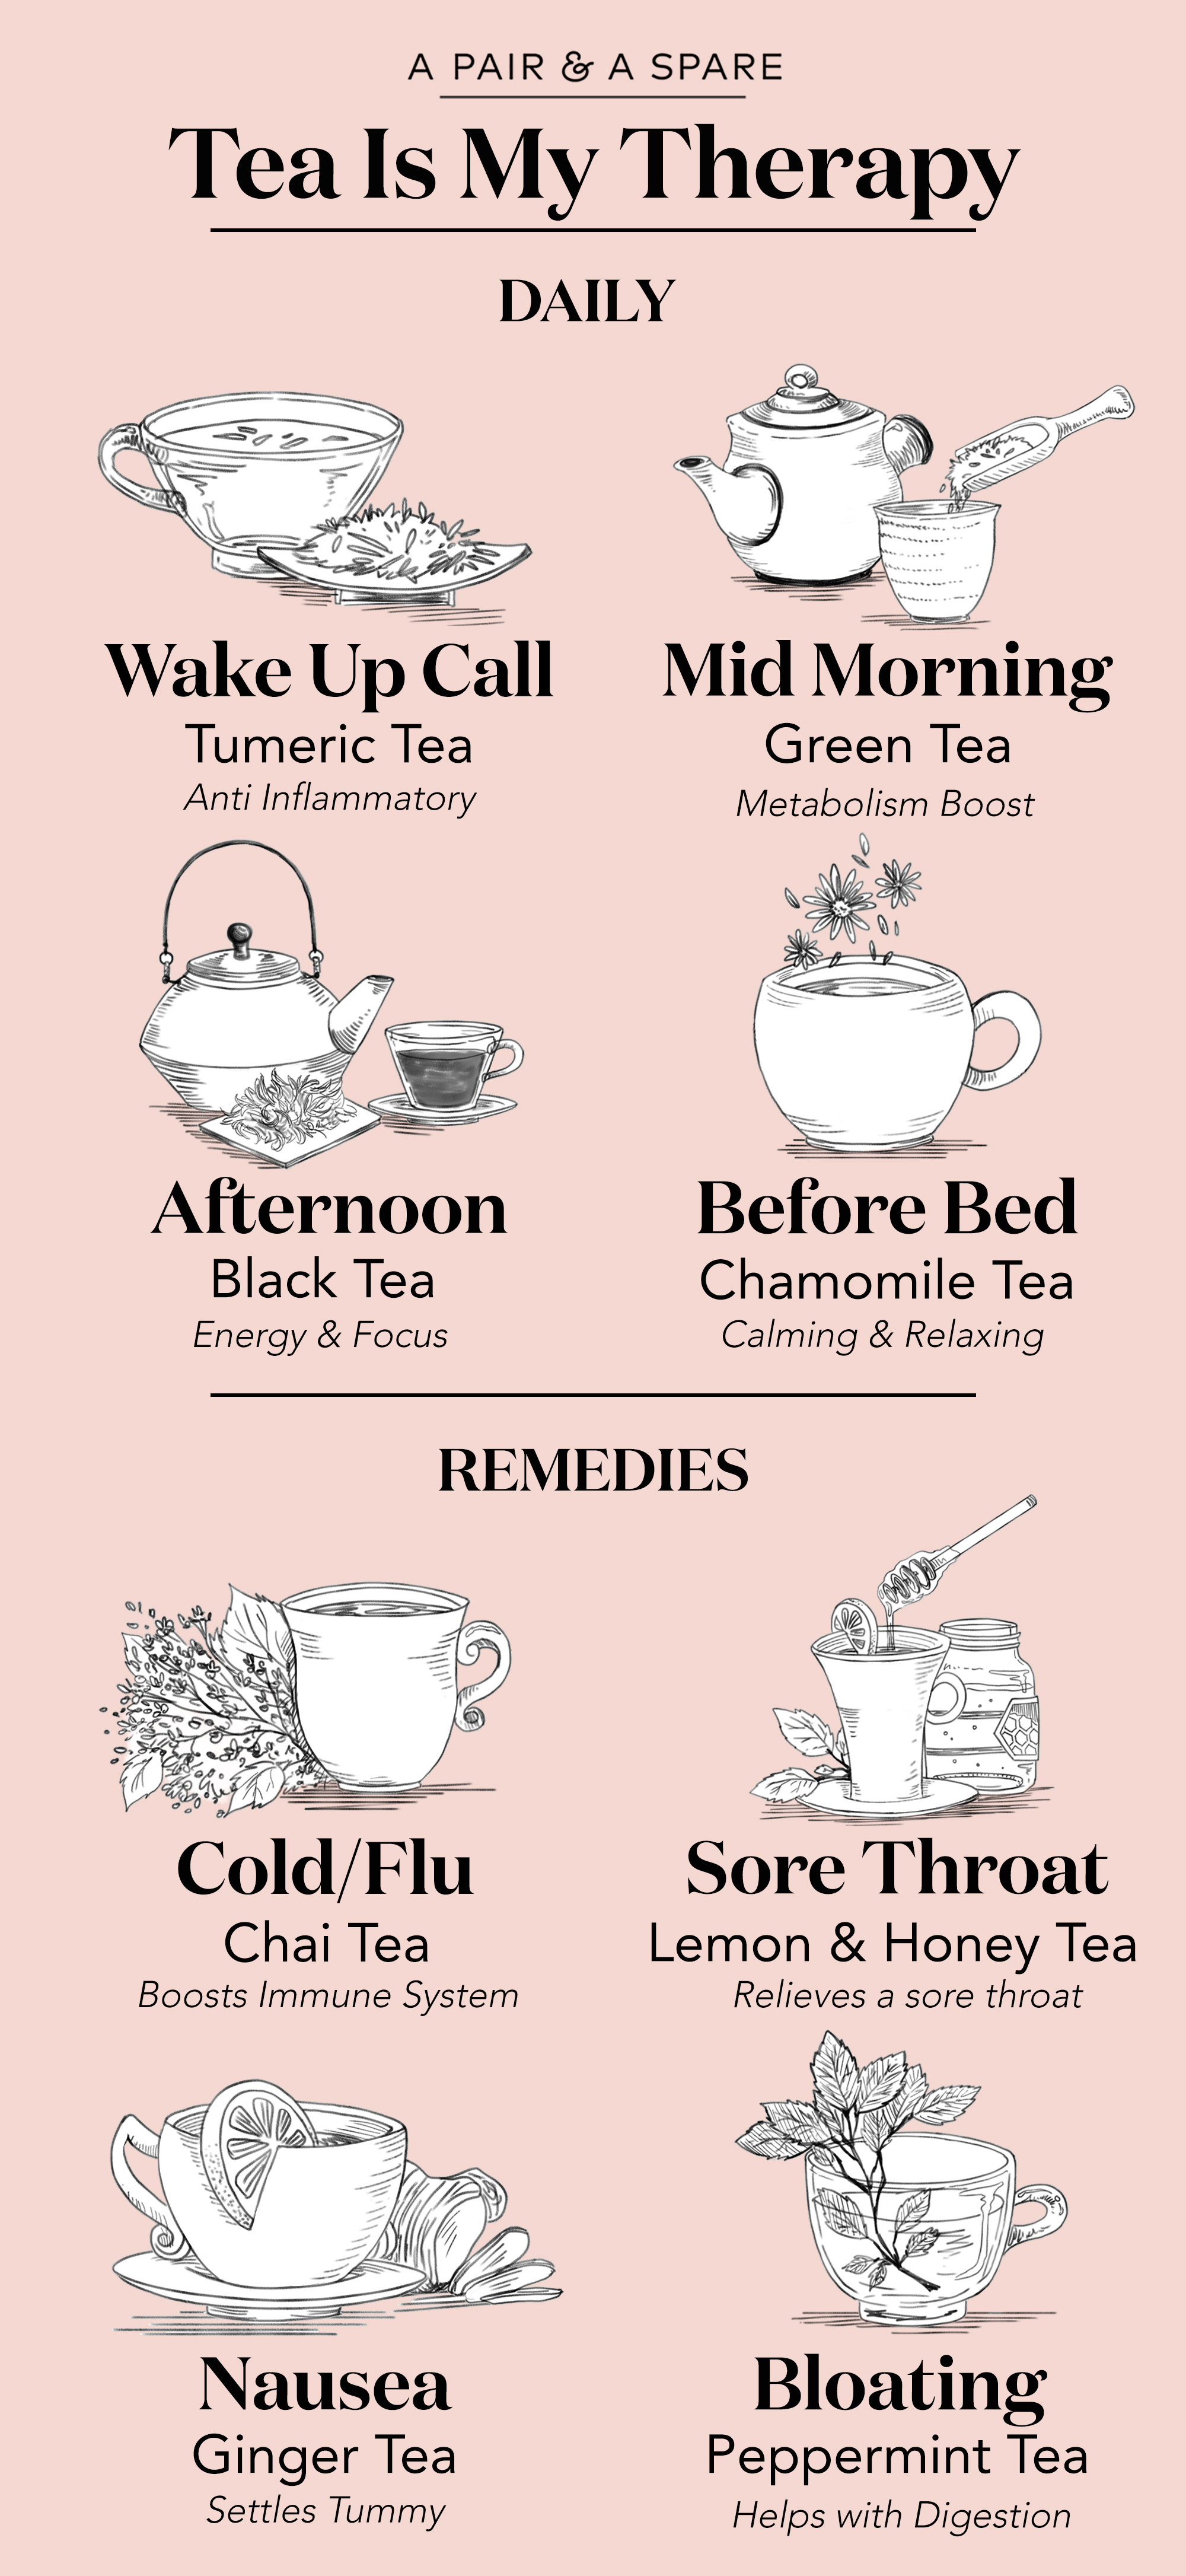 Tea Is My Therapy | Collective Gen